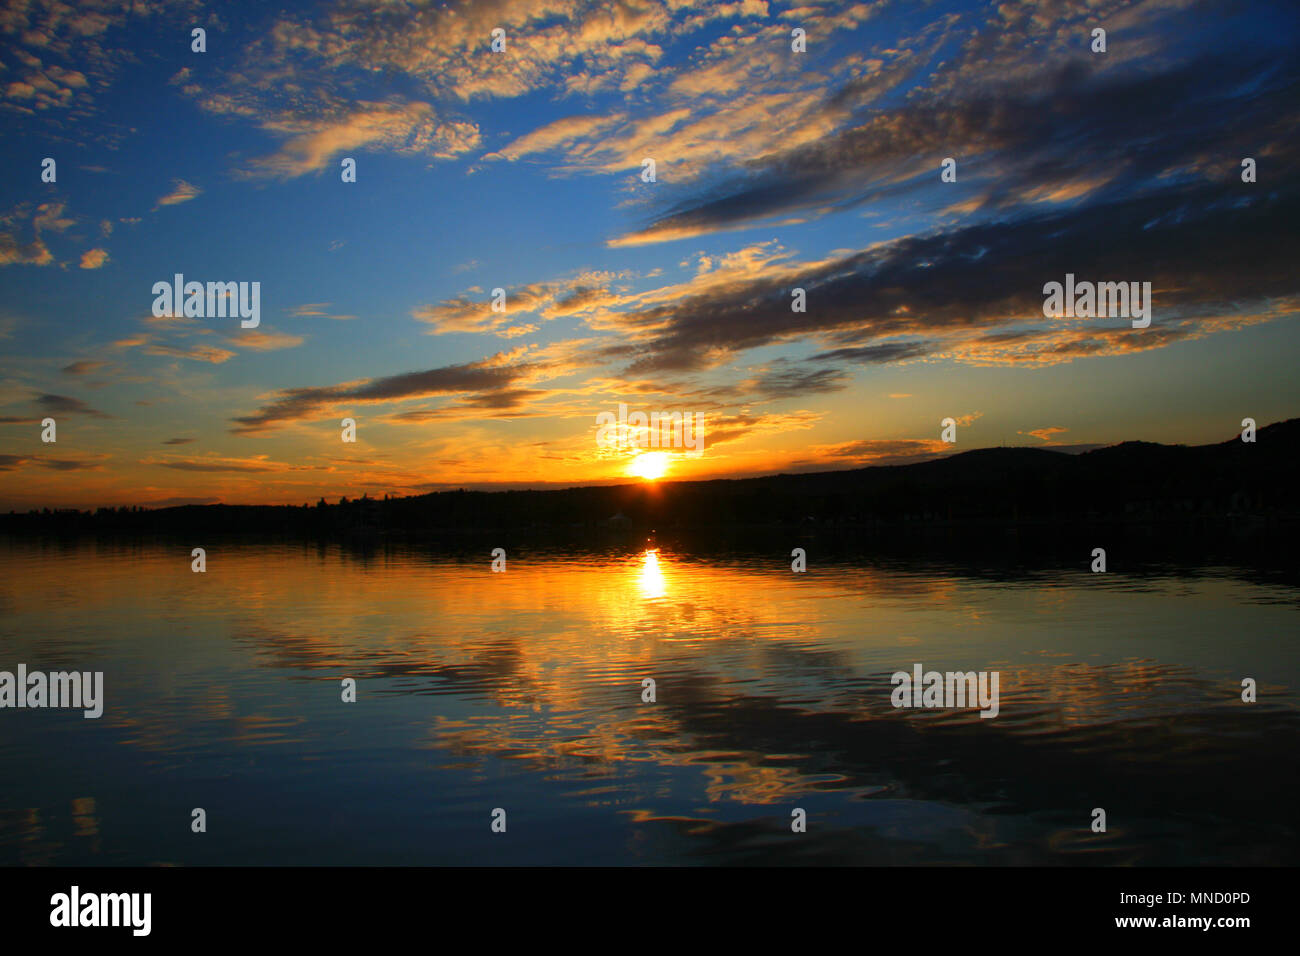 A very beautiful moments. The sky is reflecting on the water. Double sunset, magneficient. Stock Photo